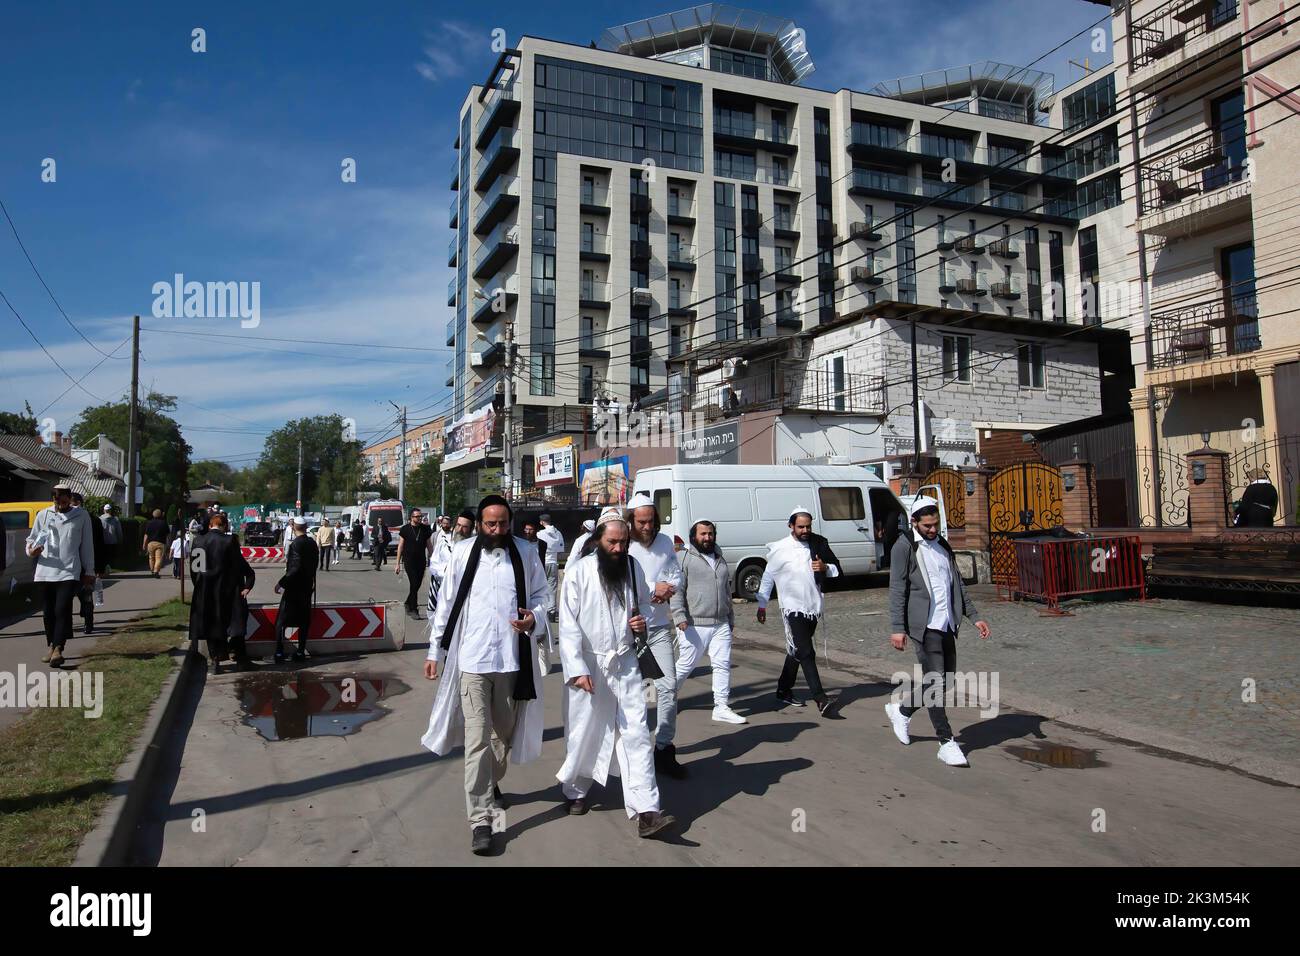 Uman, Ukraine. 26th Sep, 2022. Ultra-Orthodox Jewish pilgrims walking near the tomb of Rabbi Nachman during the celebration of the Rosh Hashanah holiday, the Jewish New Year in Uman. Every year, thousands of Orthodox Bratslav Hasidic Jews from different countries gather in Uman to mark Rosh Hashanah, Jewish New Year, near the tomb of Rabbi Nachman, a great-grandson of the founder of Hasidism. (Photo by Oleksii Chumachenko/SOPA Image/Sipa USA) Credit: Sipa USA/Alamy Live News Stock Photo